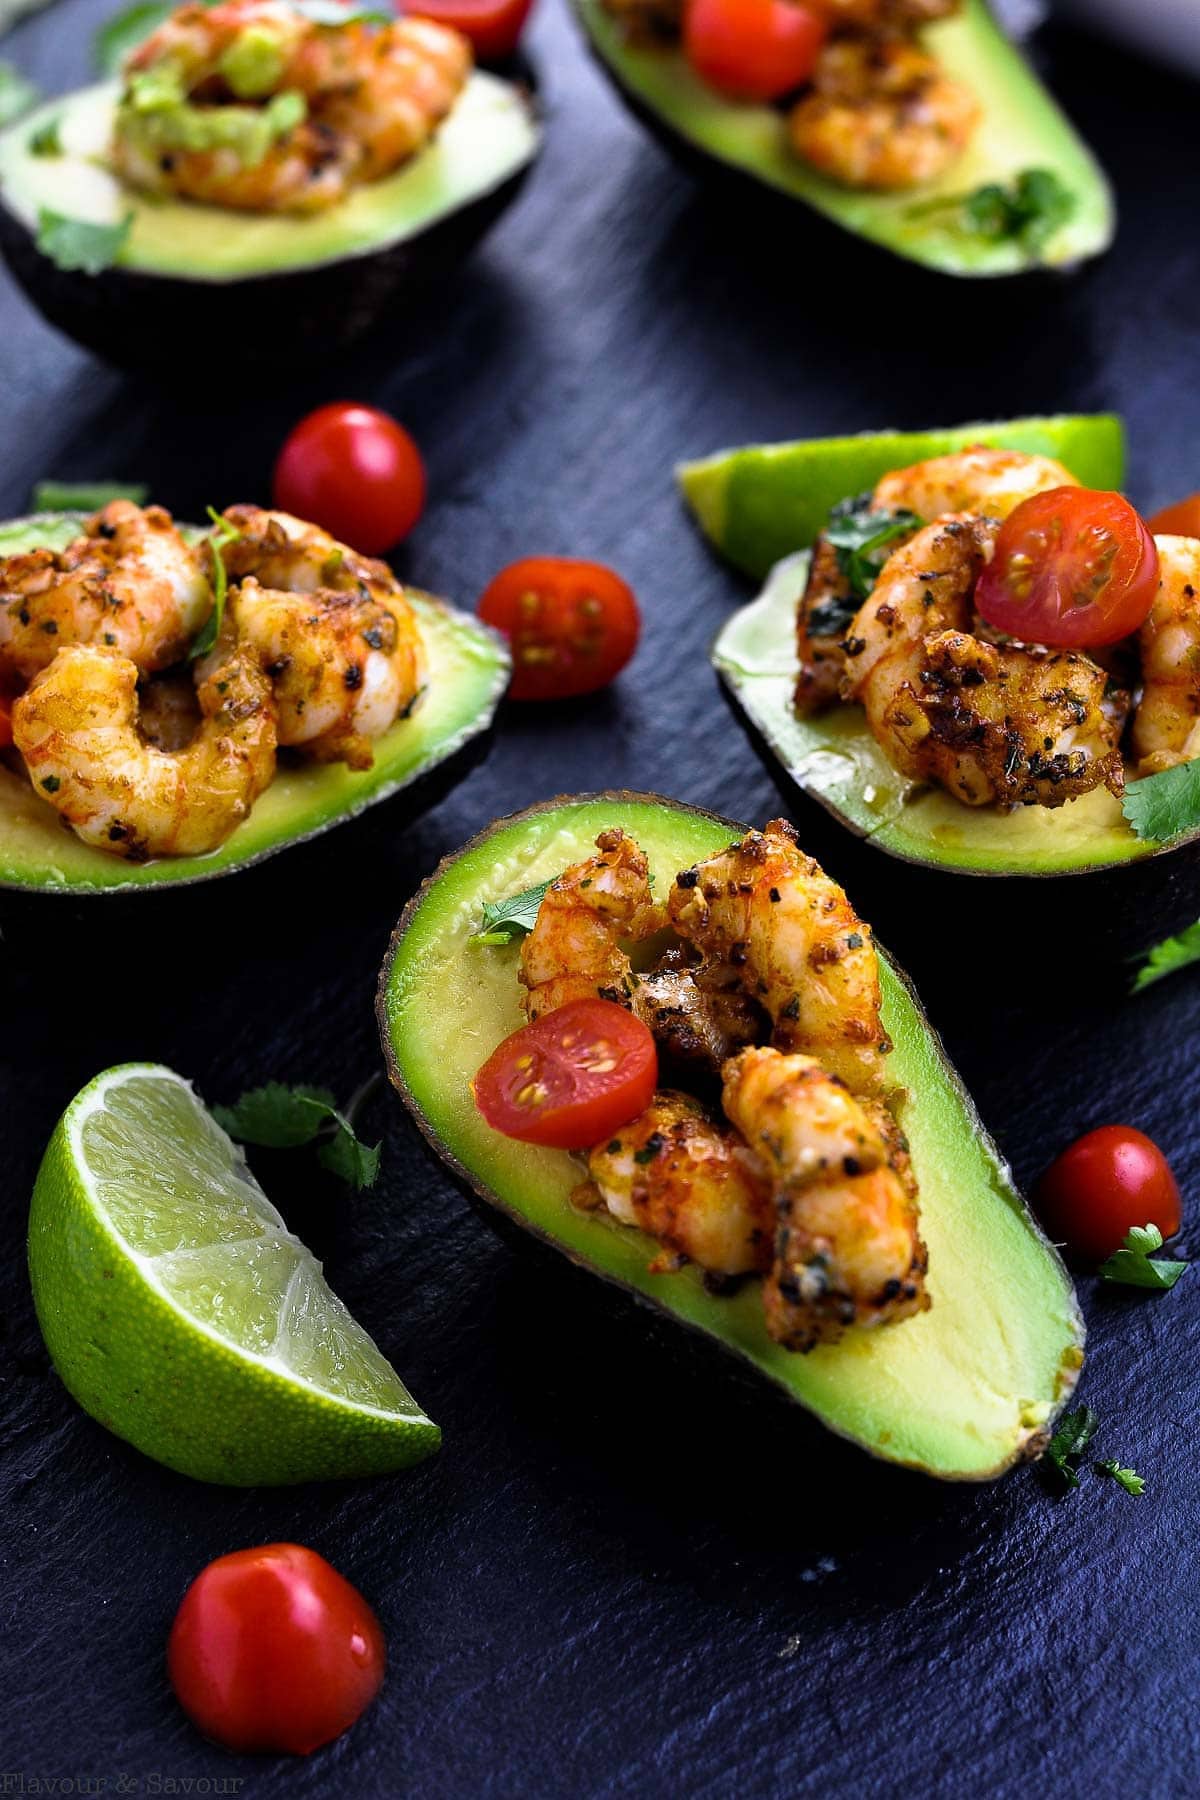 Cajun Shrimp Stuffed Avocados overhead view with cherry tomatoes and limes